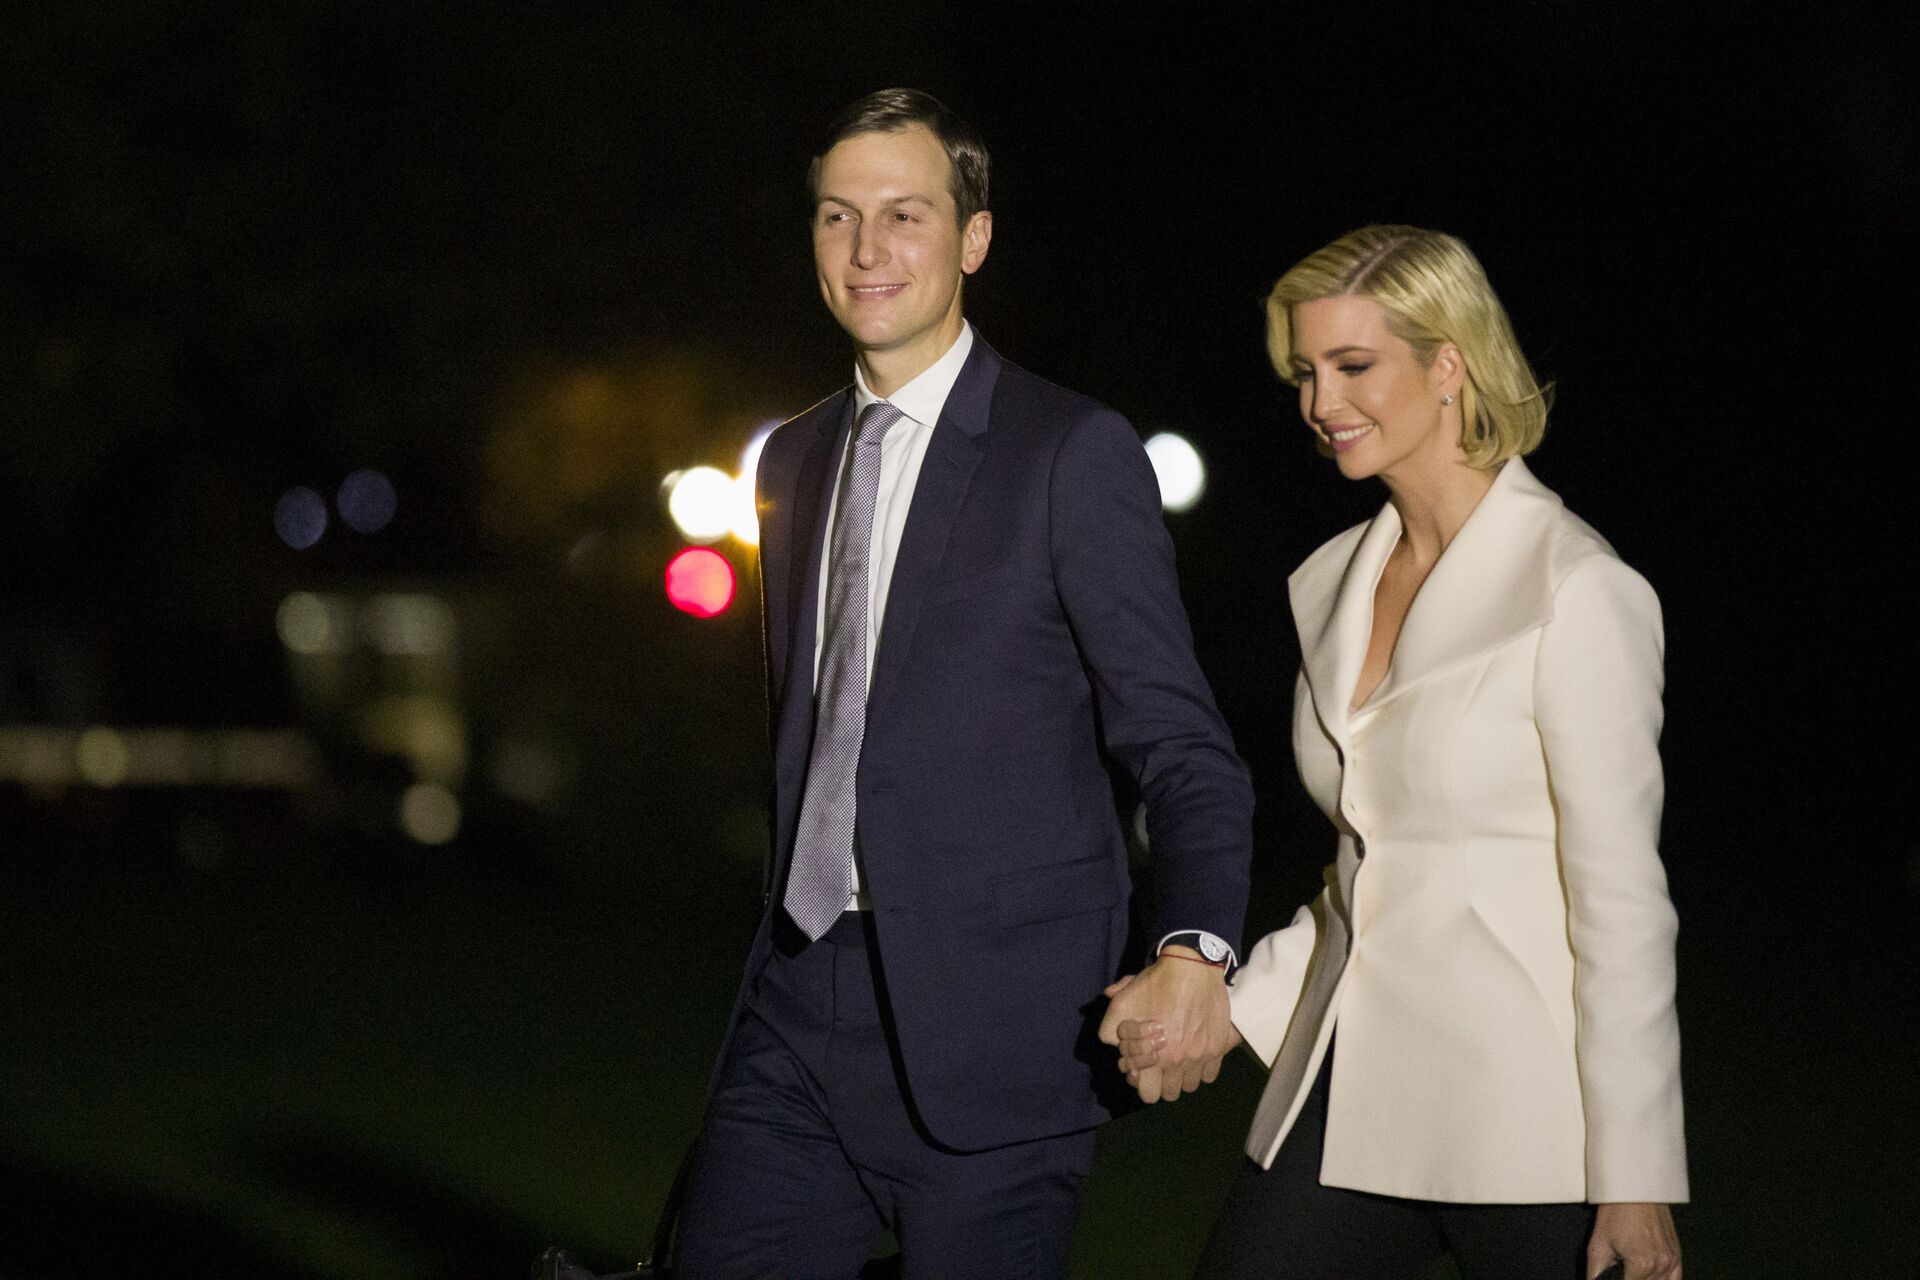 White House Senior Adviser Jared Kushner and his wife Ivanka Trump, the daughter and senior adviser to President Donald Trump, walk to the White House after stepping off Marine One on the South Lawn of the White House, early Friday, Oct. 18, 2019, in Washington. - Sputnik International, 1920, 07.09.2021